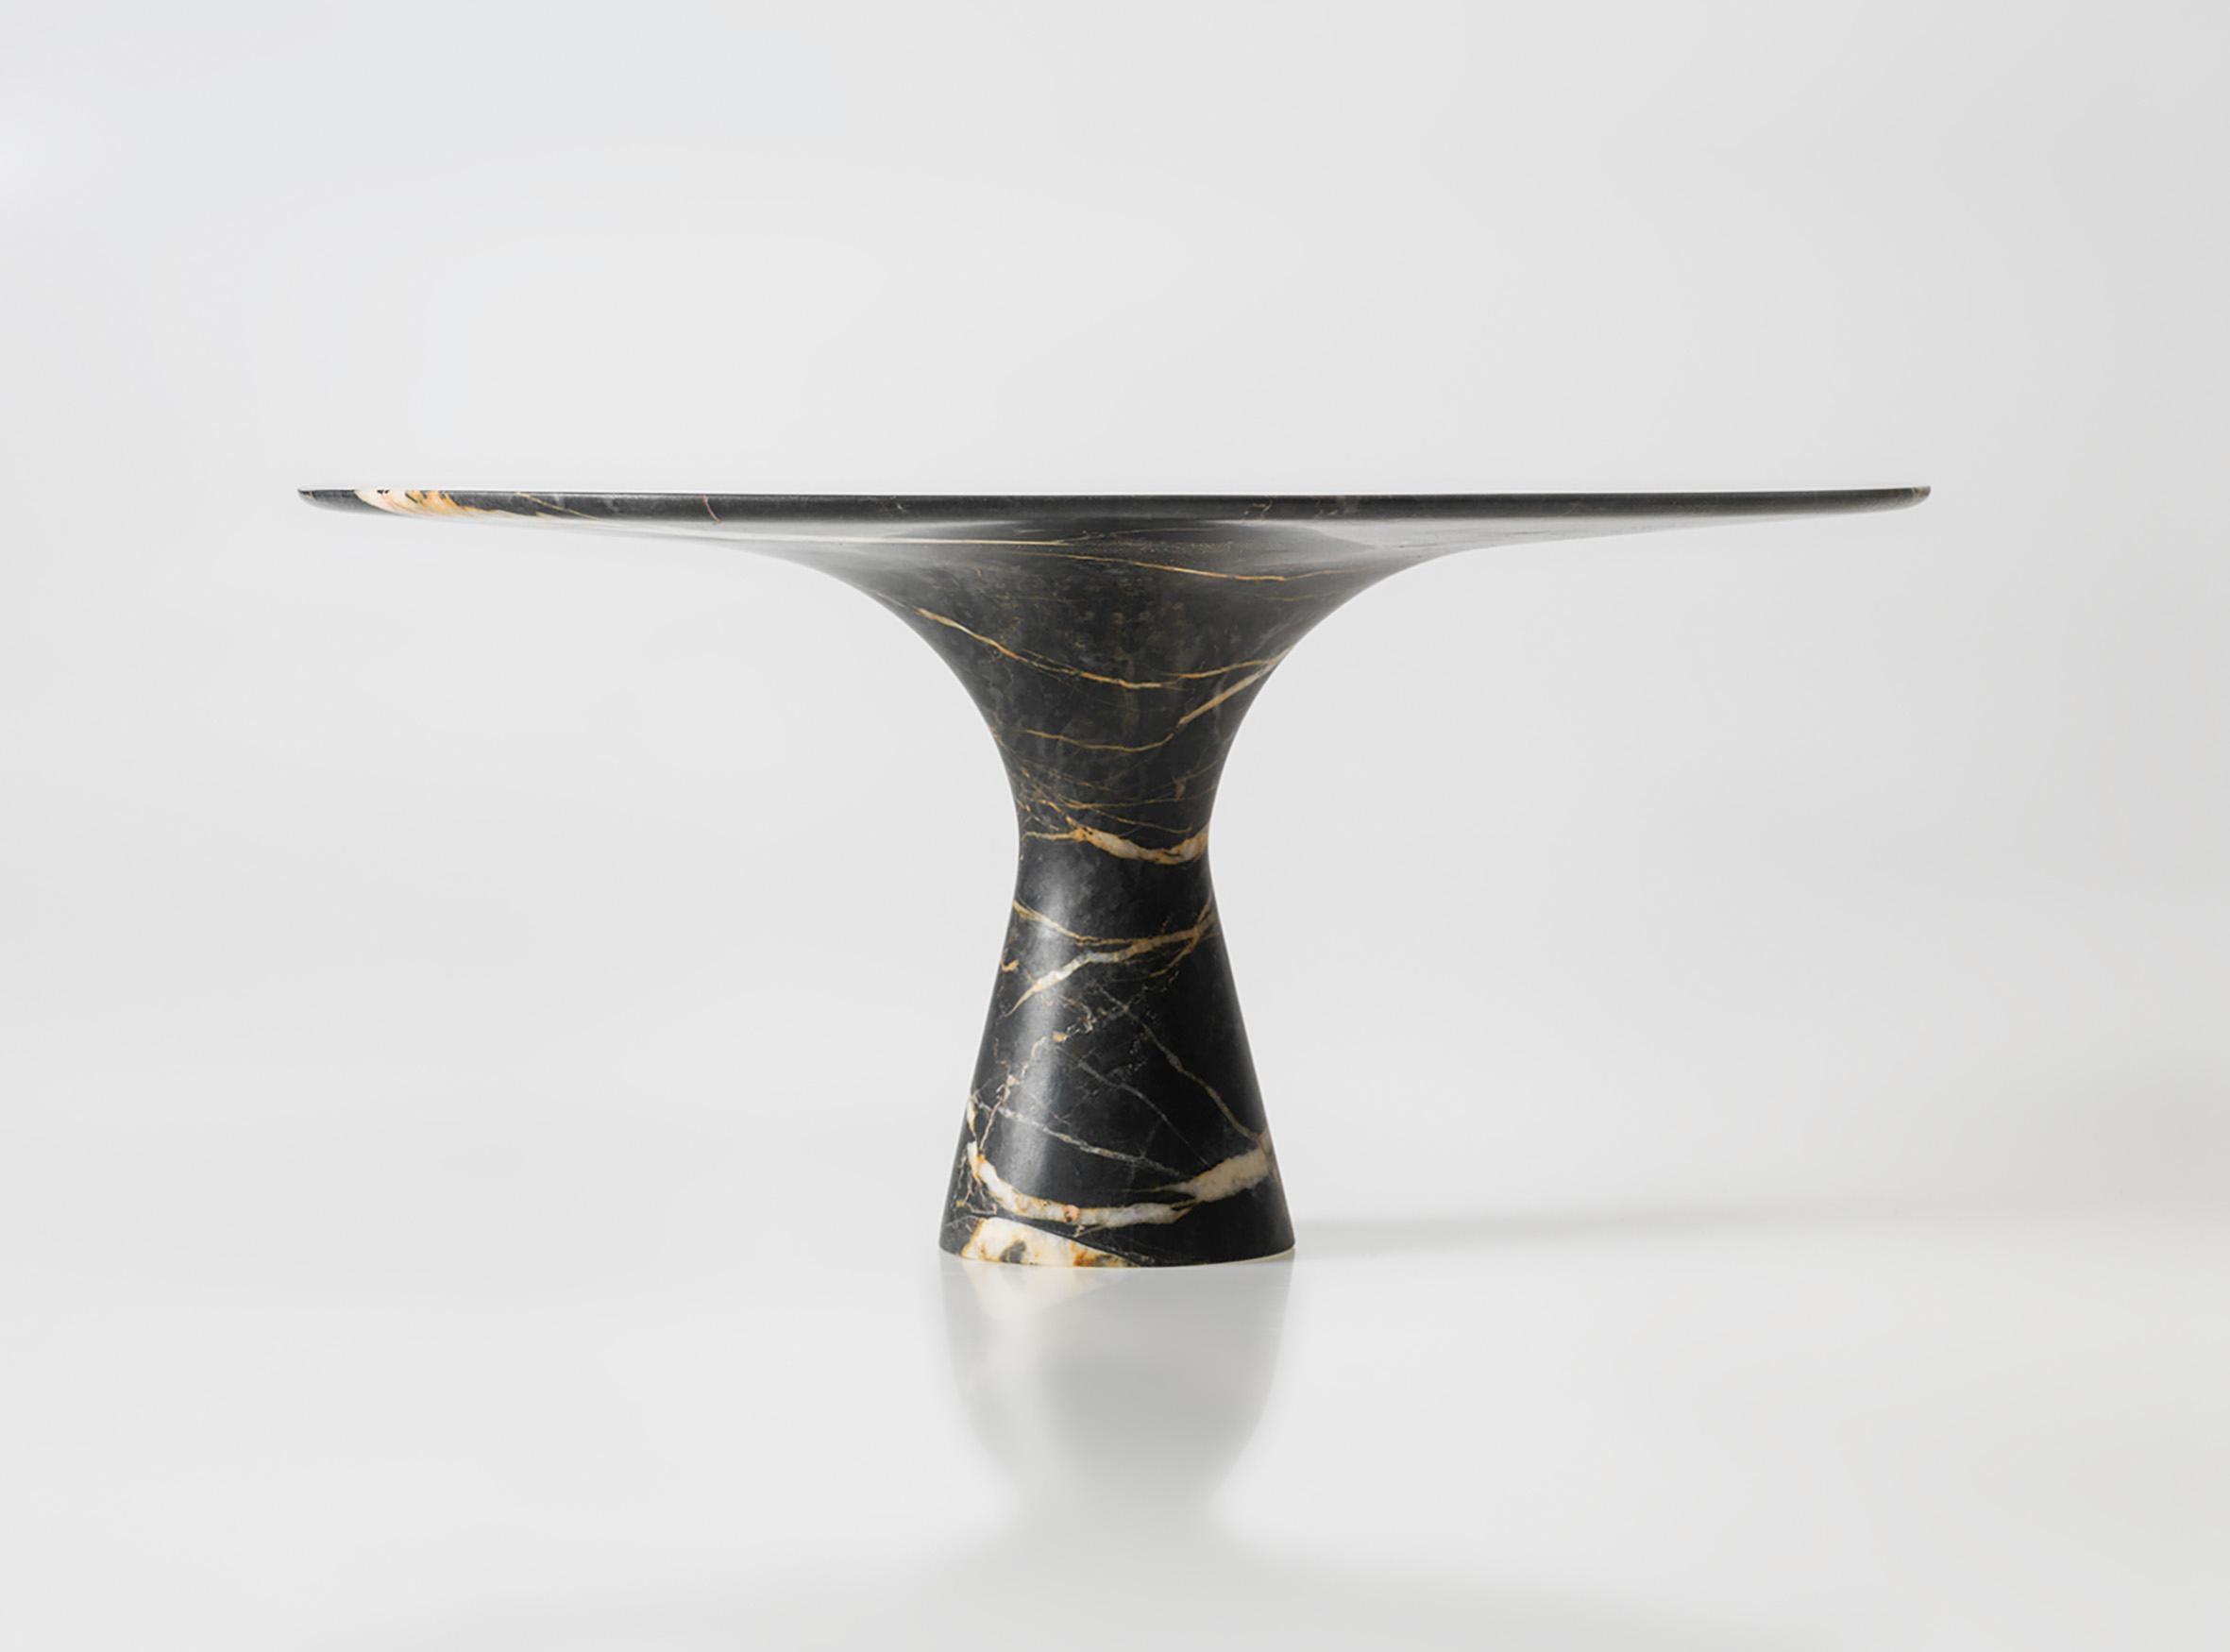 Port Saint Laurent refined contemporary marble dining table 250/75
Dimensions: 250 x 160 x 75 cm
Materials: Port Saint Laurent marble.

Angelo is the essence of a round table in natural stone, a sculptural shape in robust material with elegant lines